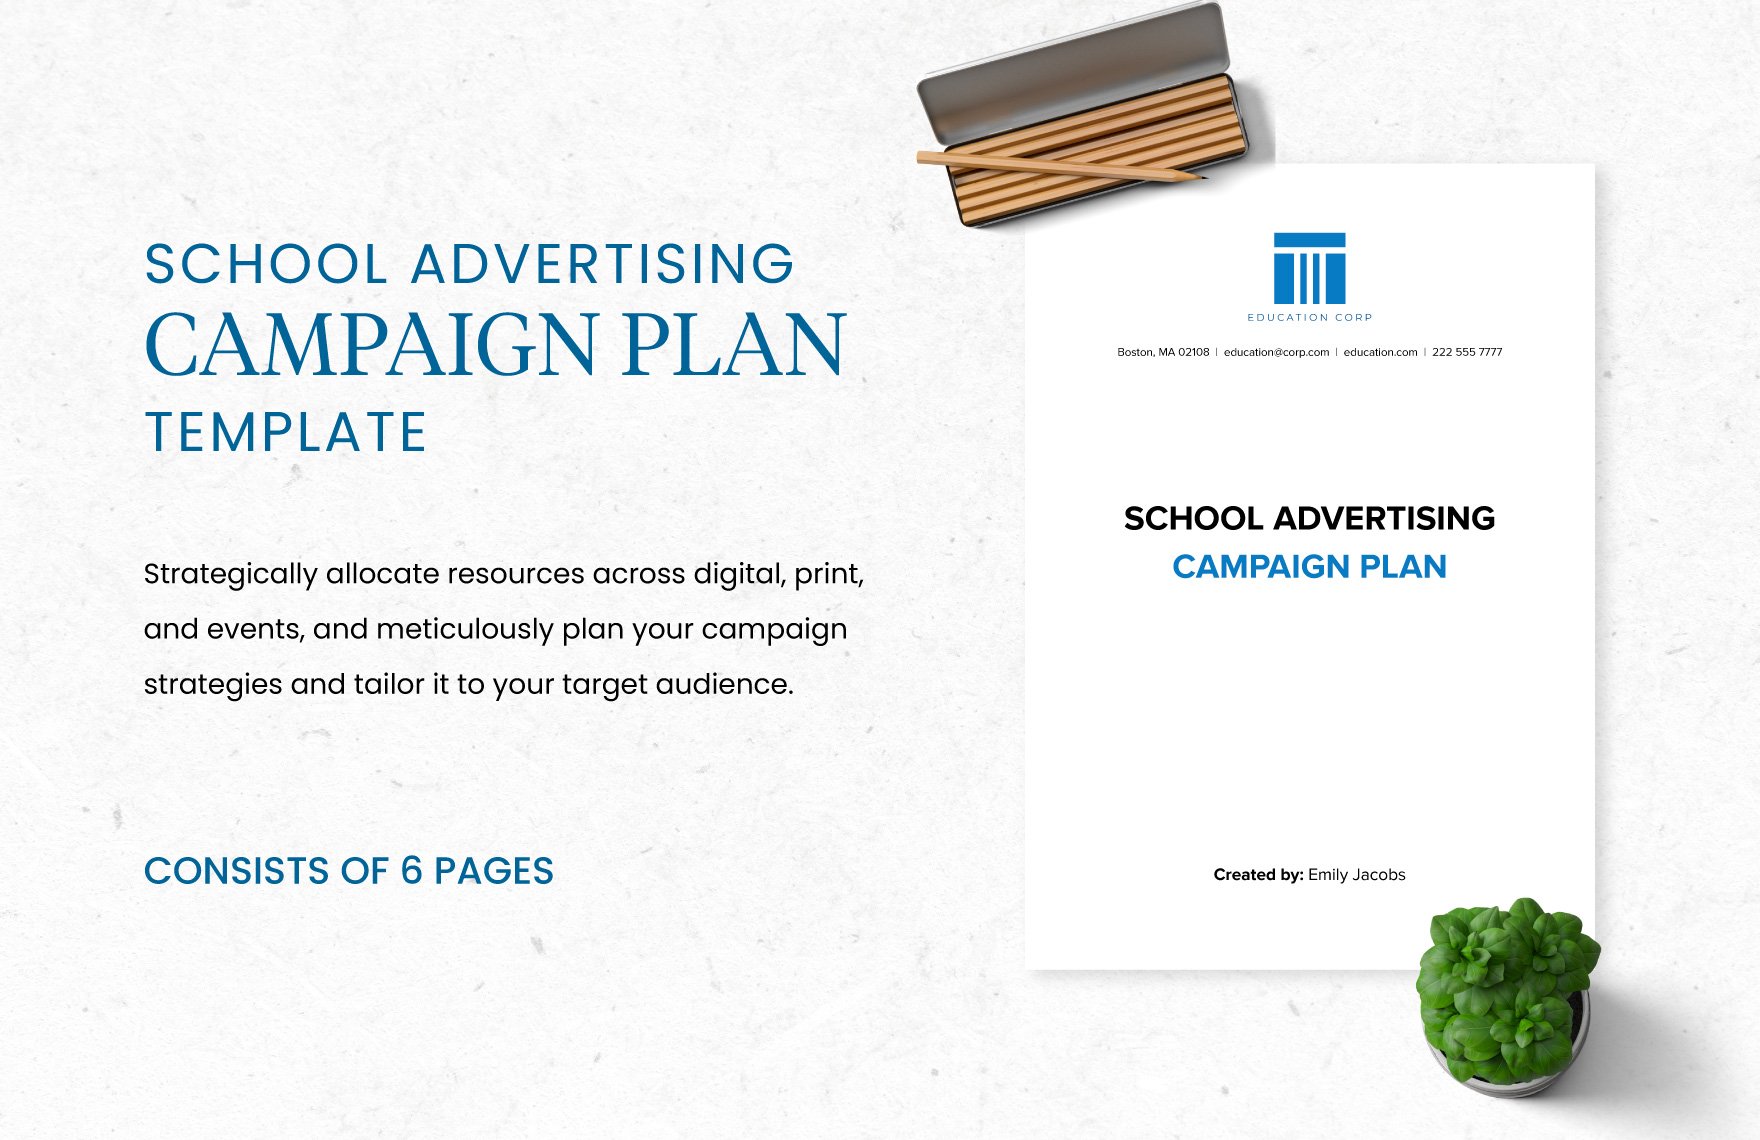 School Advertising Campaign Plan Template